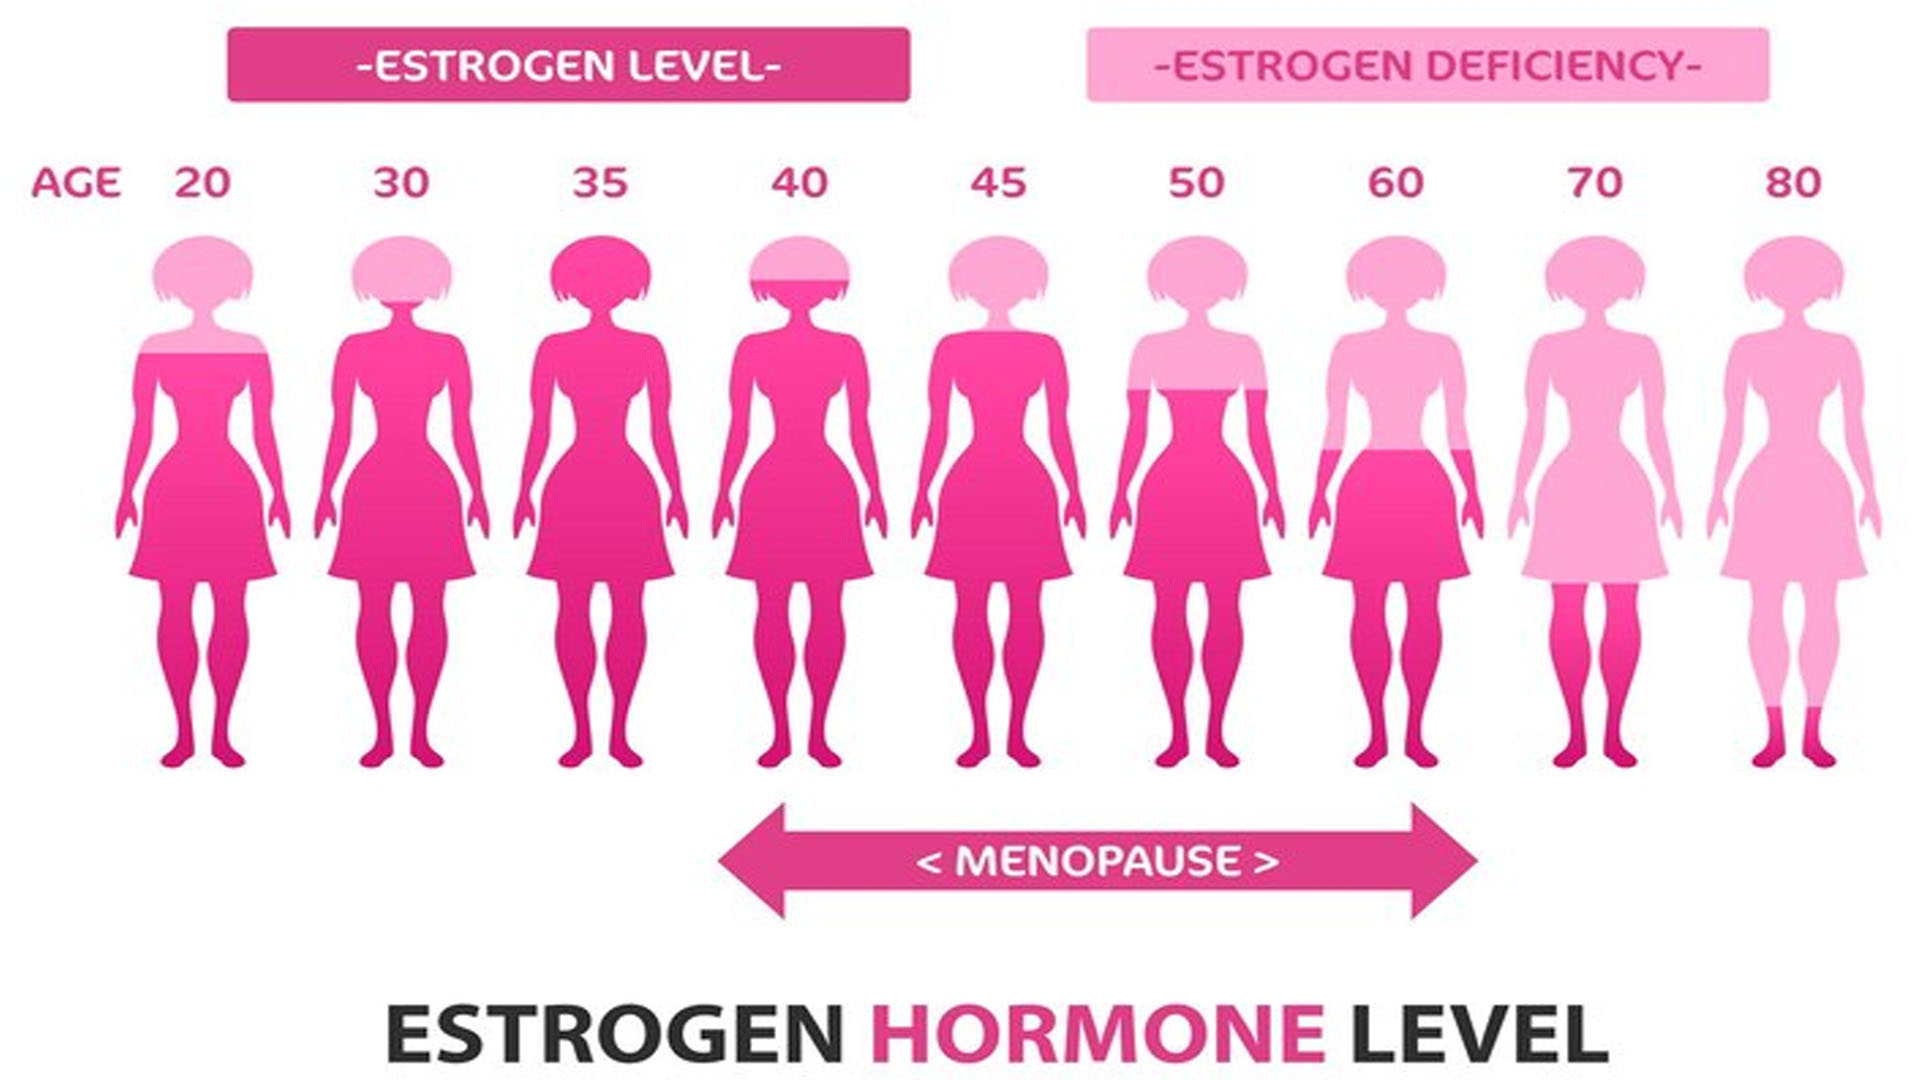 What are the Symptoms of a Lack of Estrogen?